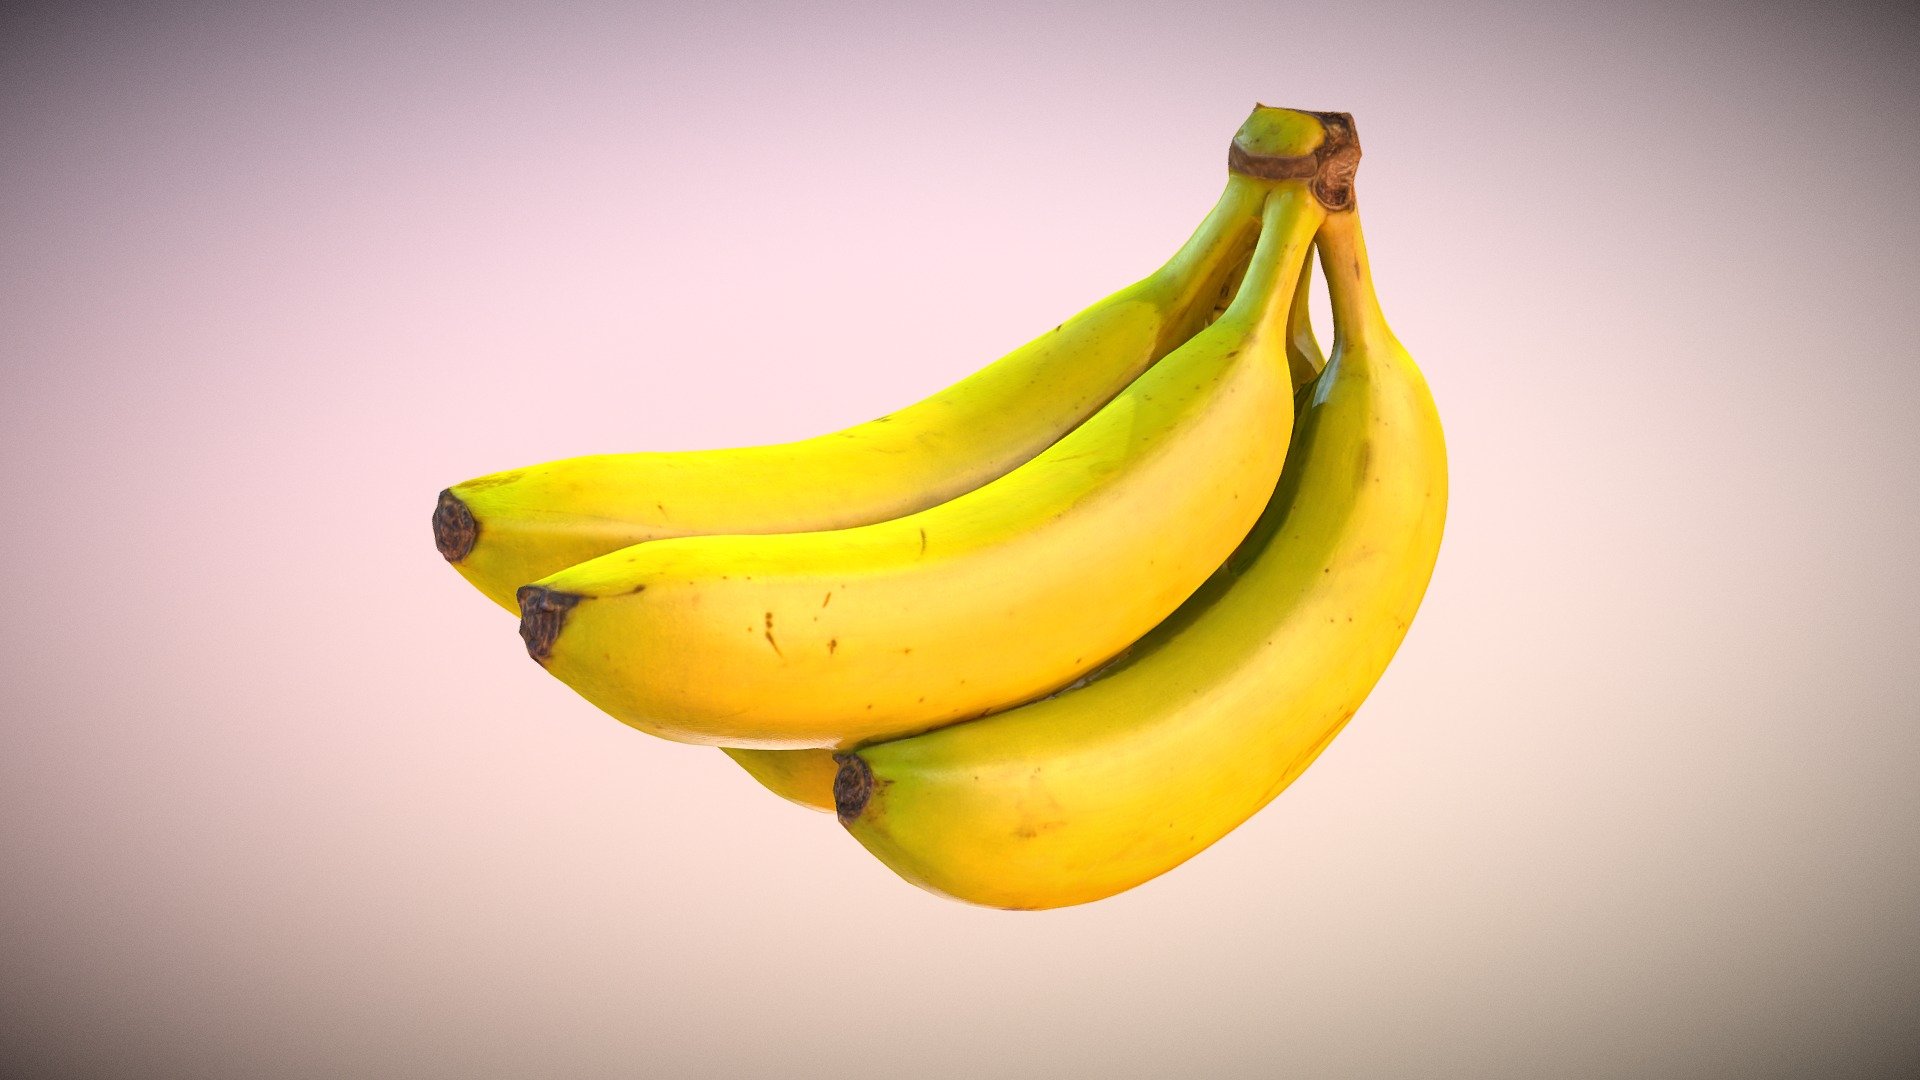 single camera 3d scan of a bunch of bananas

Used the foldio360 and a homemade suspension rig to take 48 pics (at 5 different heights) around, a Sony A7R and a bunch of lights.

All textures are 8192x8192 pixels 3d model